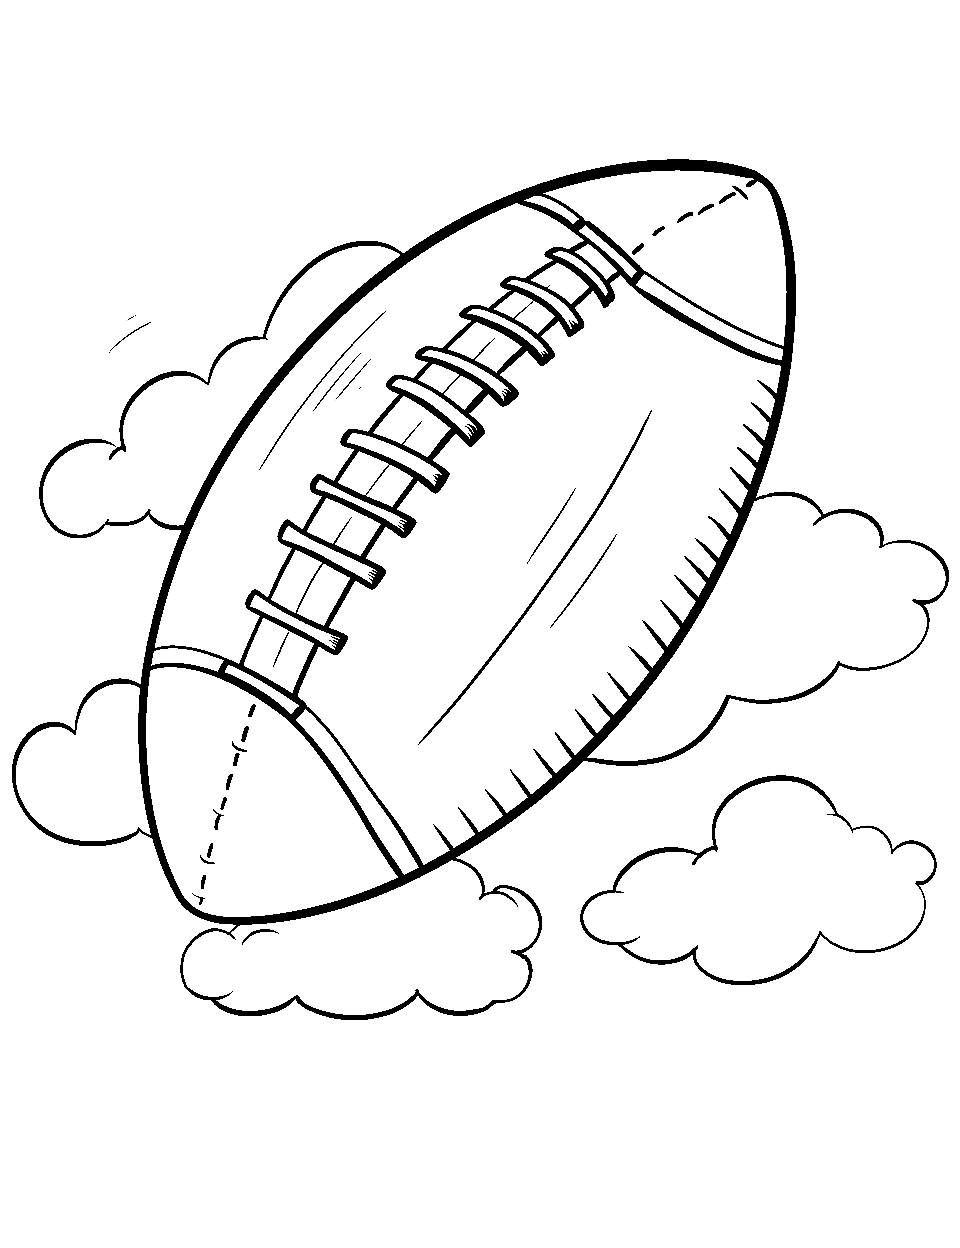 High-flying Football Coloring Page - A football soaring through the sky with clouds around it.